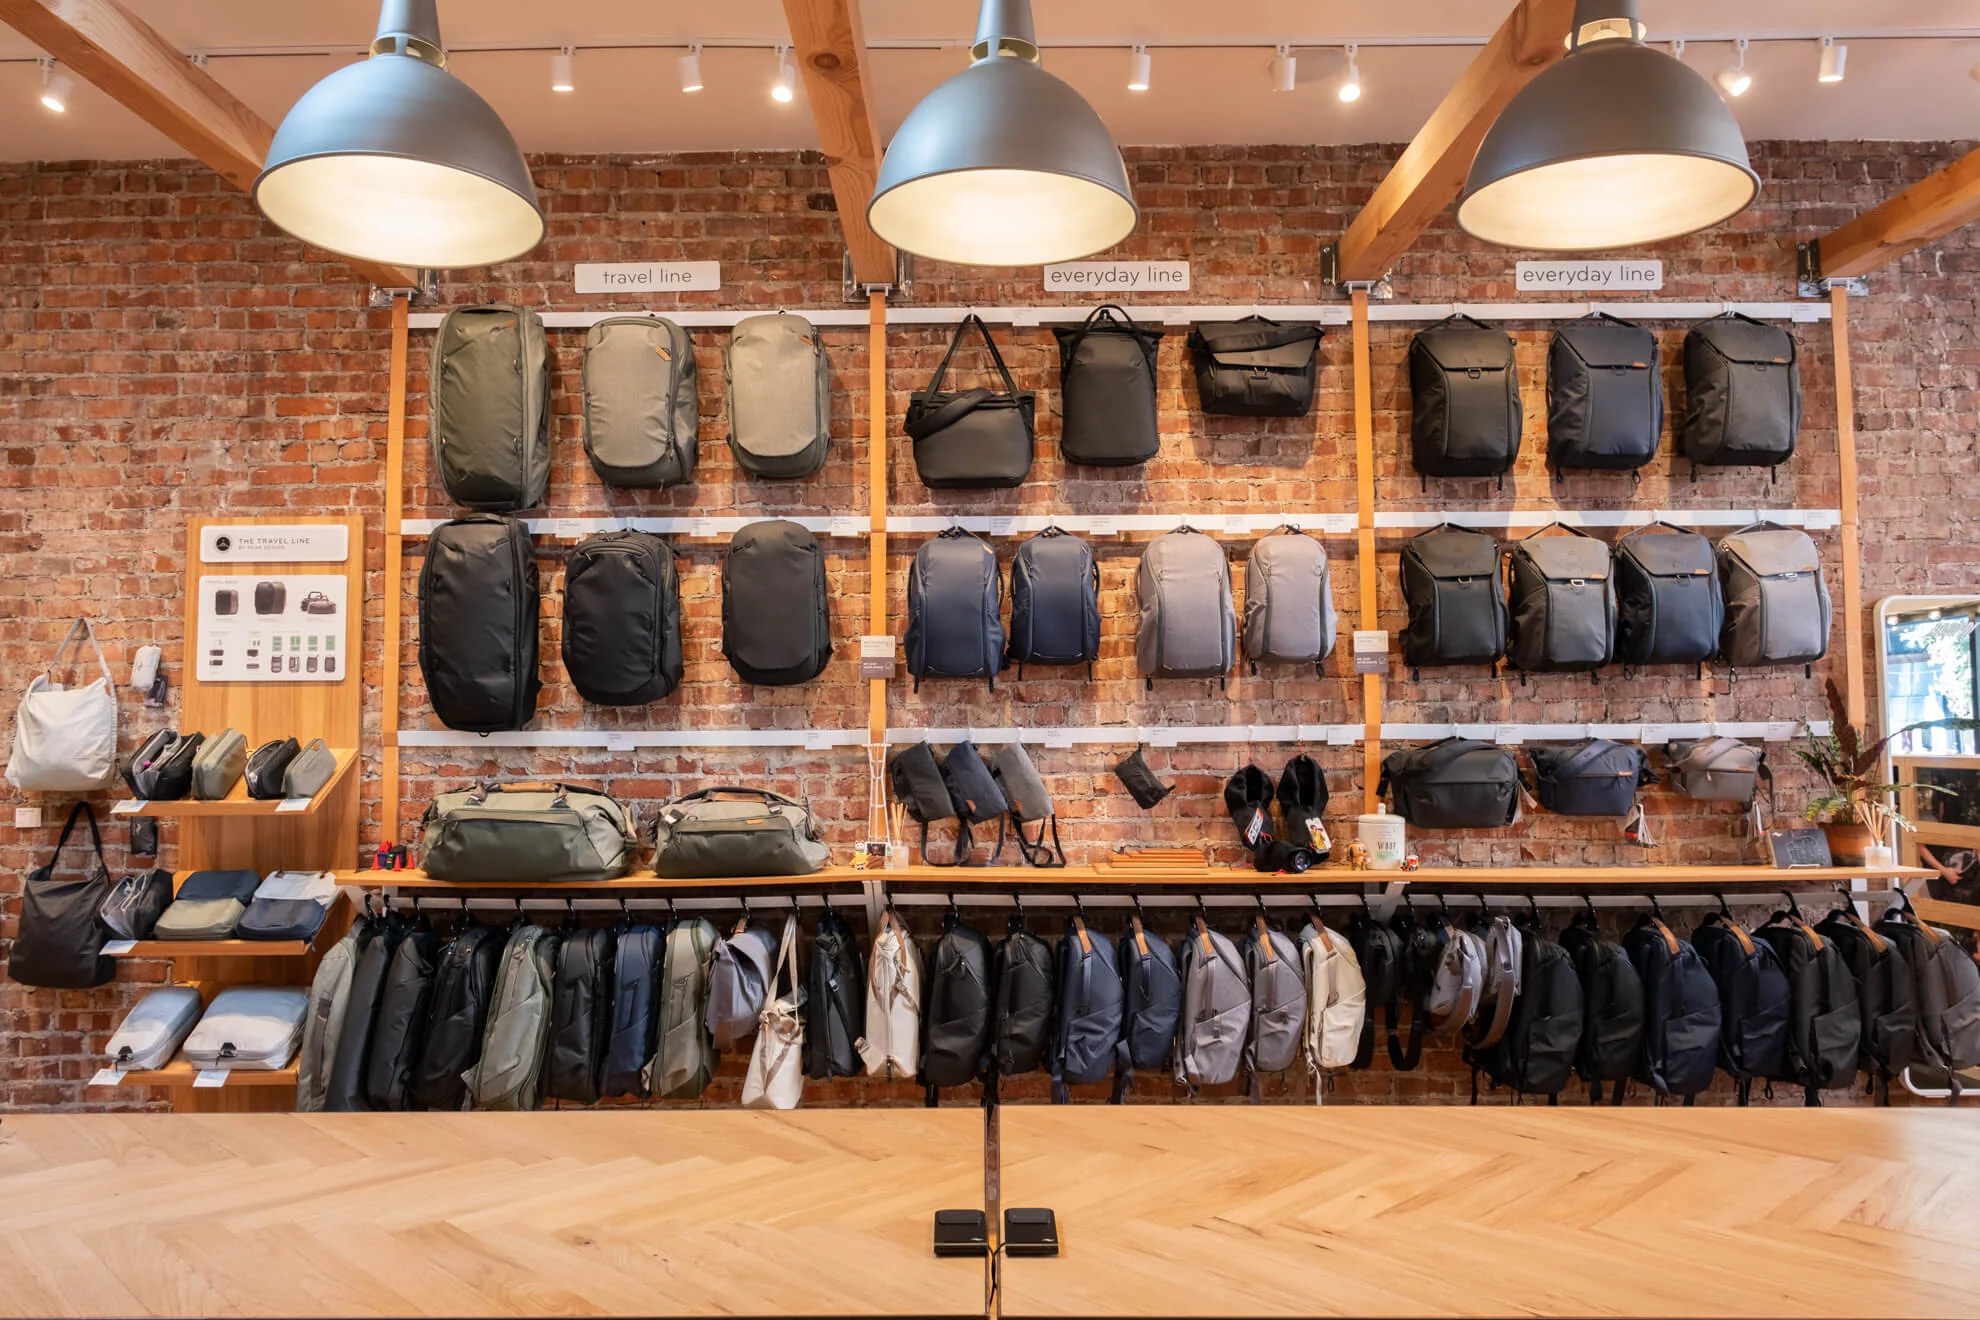 Handmade quality backpacks and bags in neutral colors including black, gray, tan, and khaki aligning a brick wall inside Peak Design San Francisco